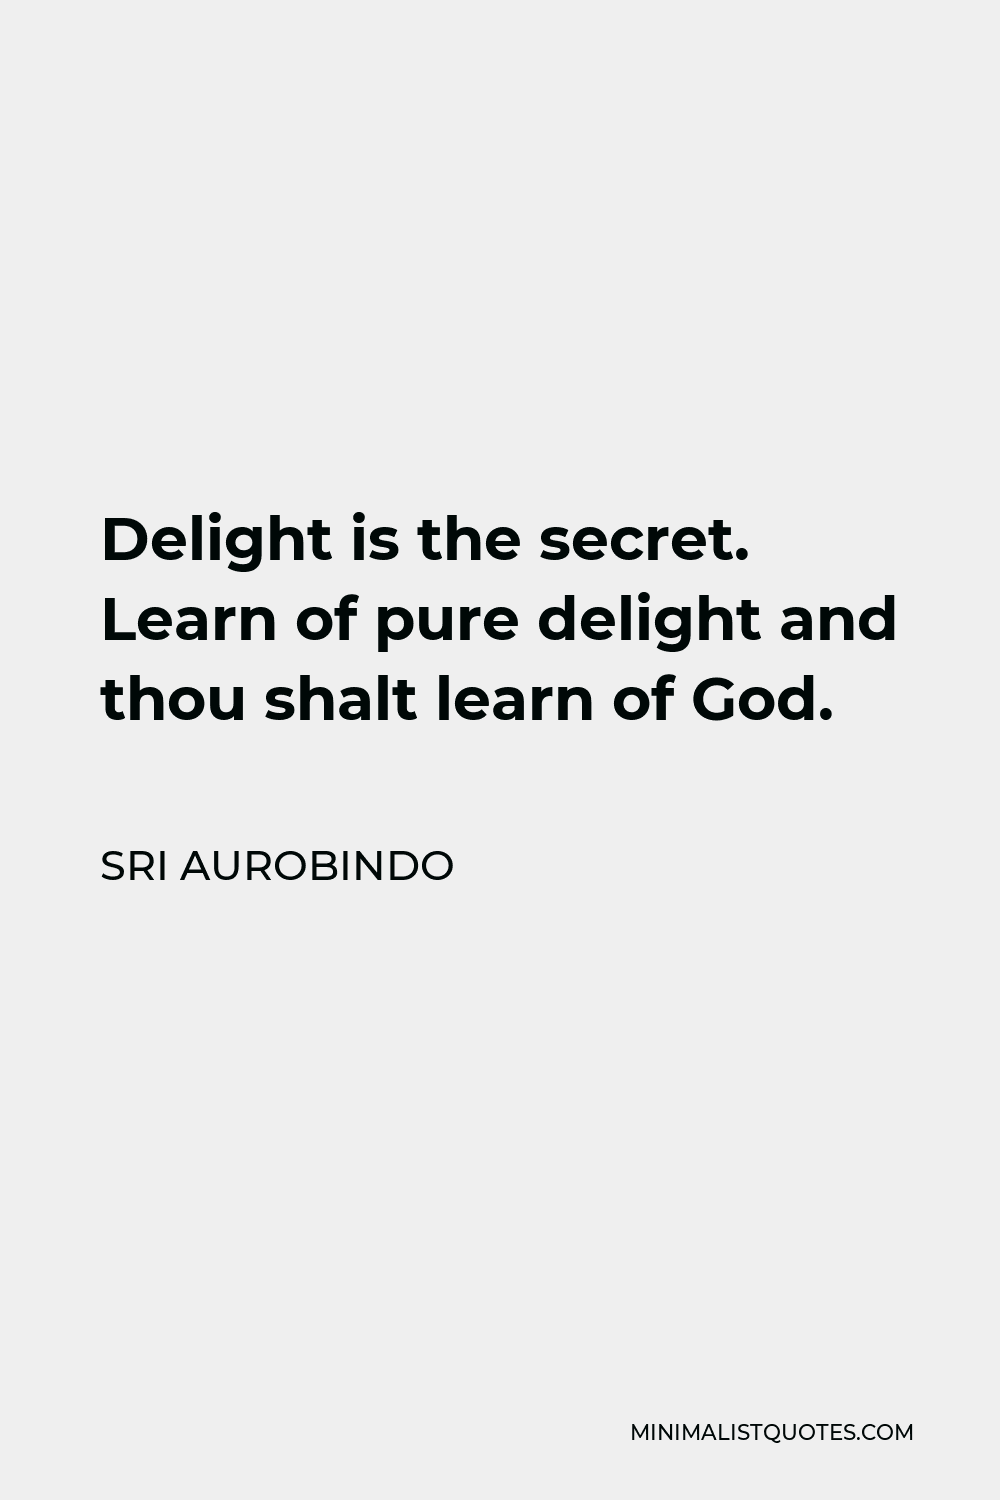 Sri Aurobindo Quote - Delight is the secret. Learn of pure delight and thou shalt learn of God.